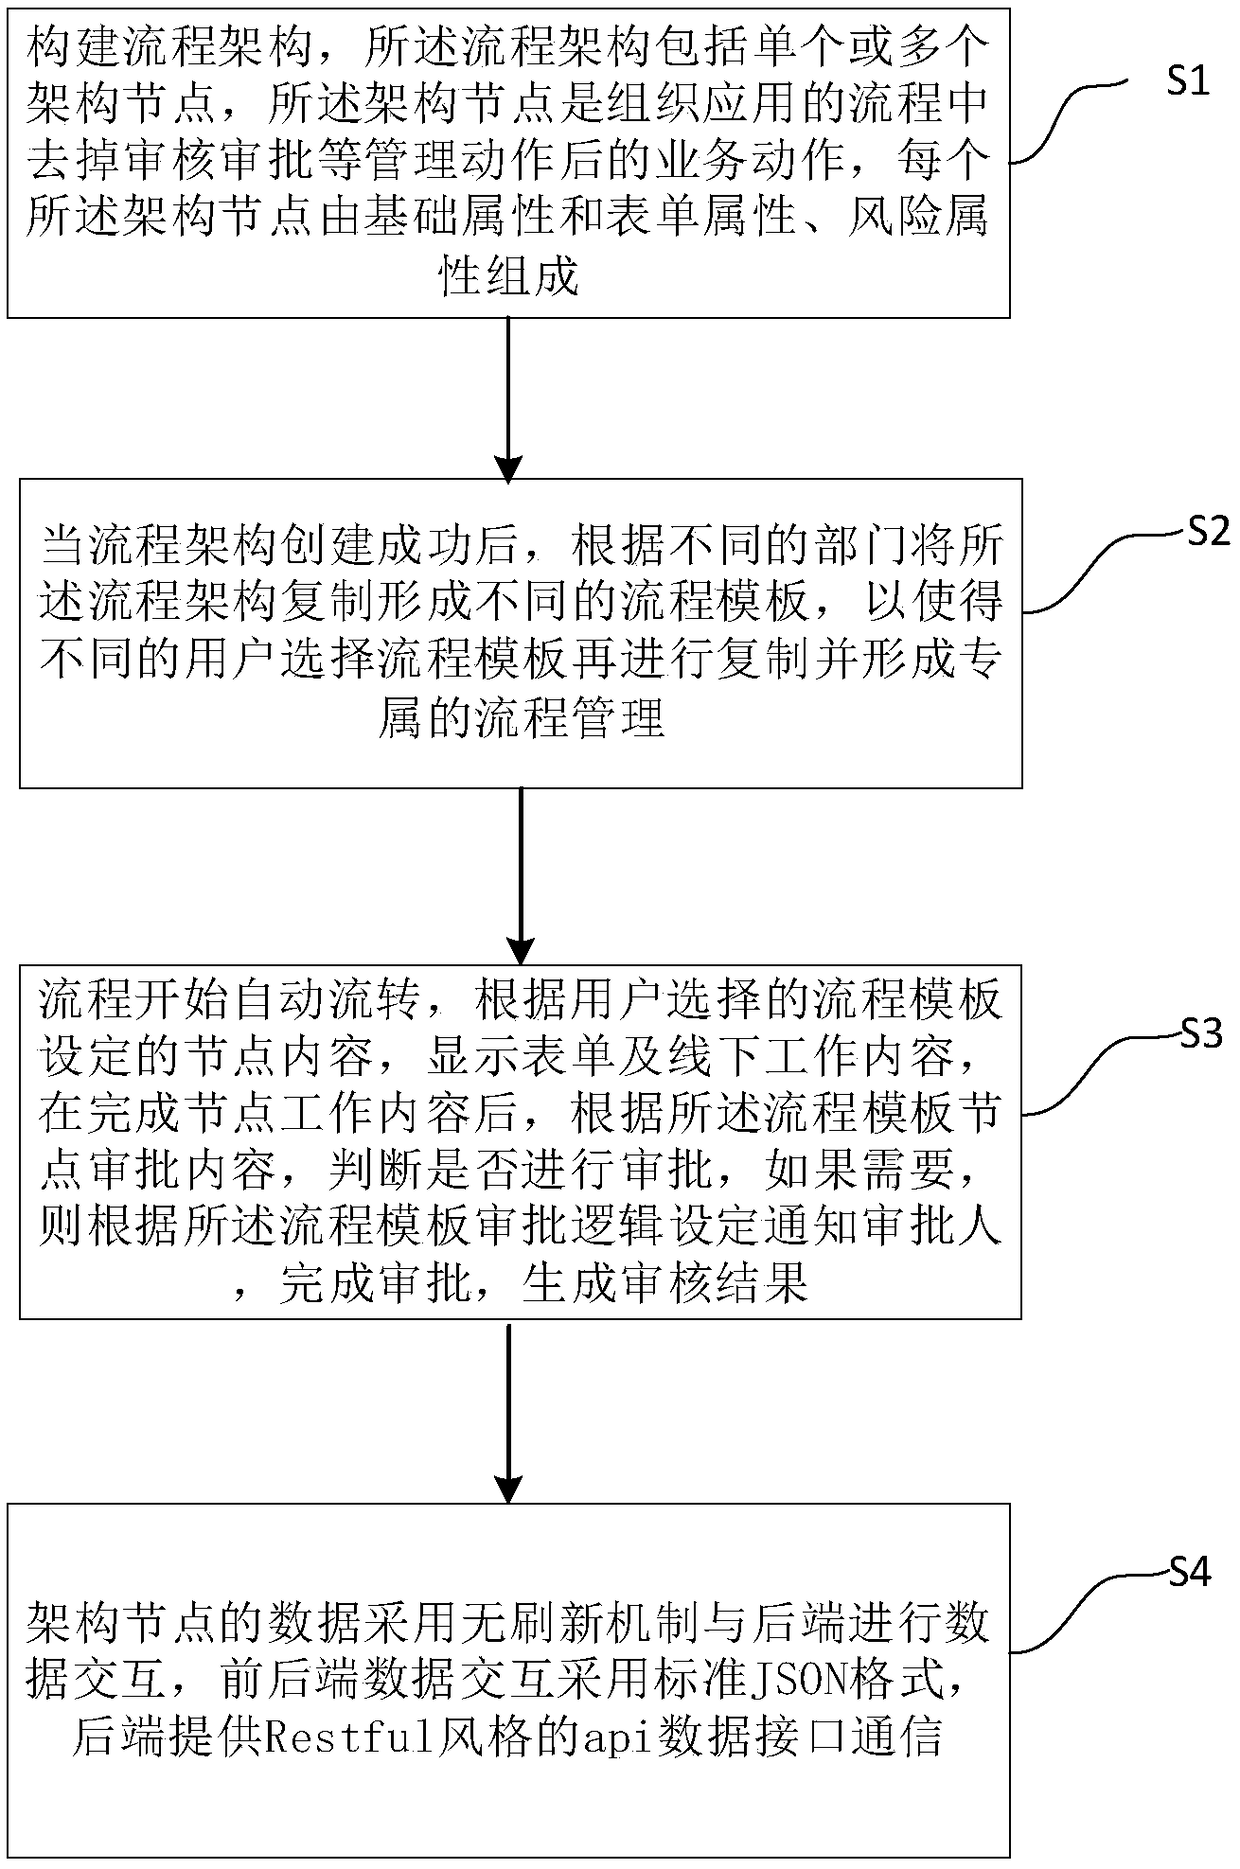 An internal control system management method with a process structure as a core